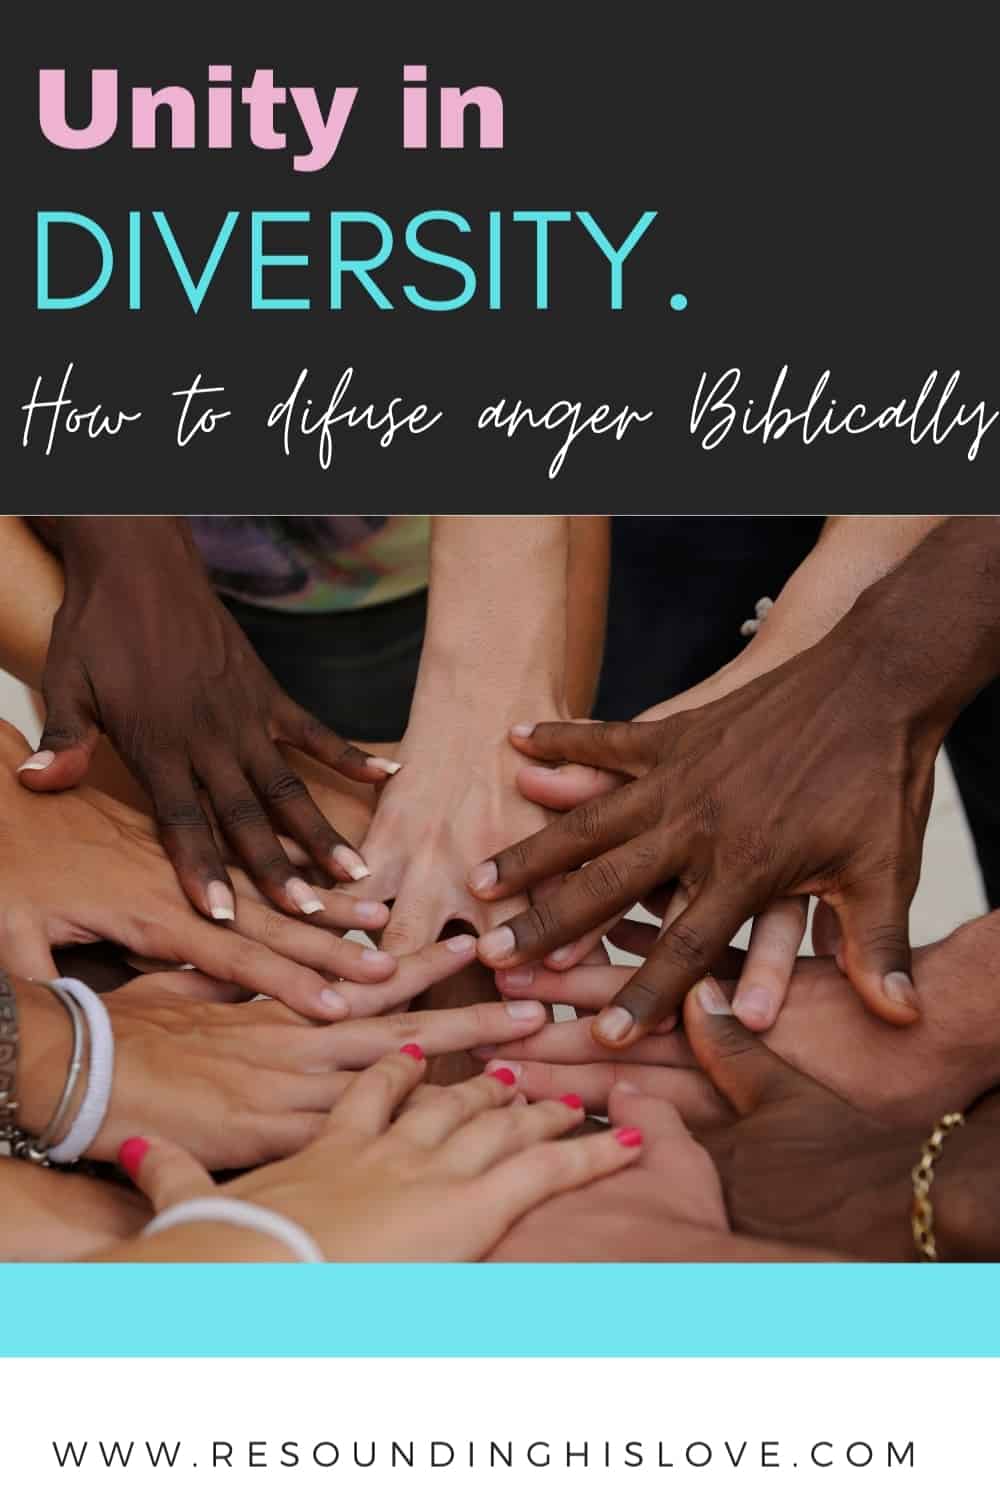 an image of multicolor hands showing unity with text Unity in Diversity: How to Diffuse Anger Biblically